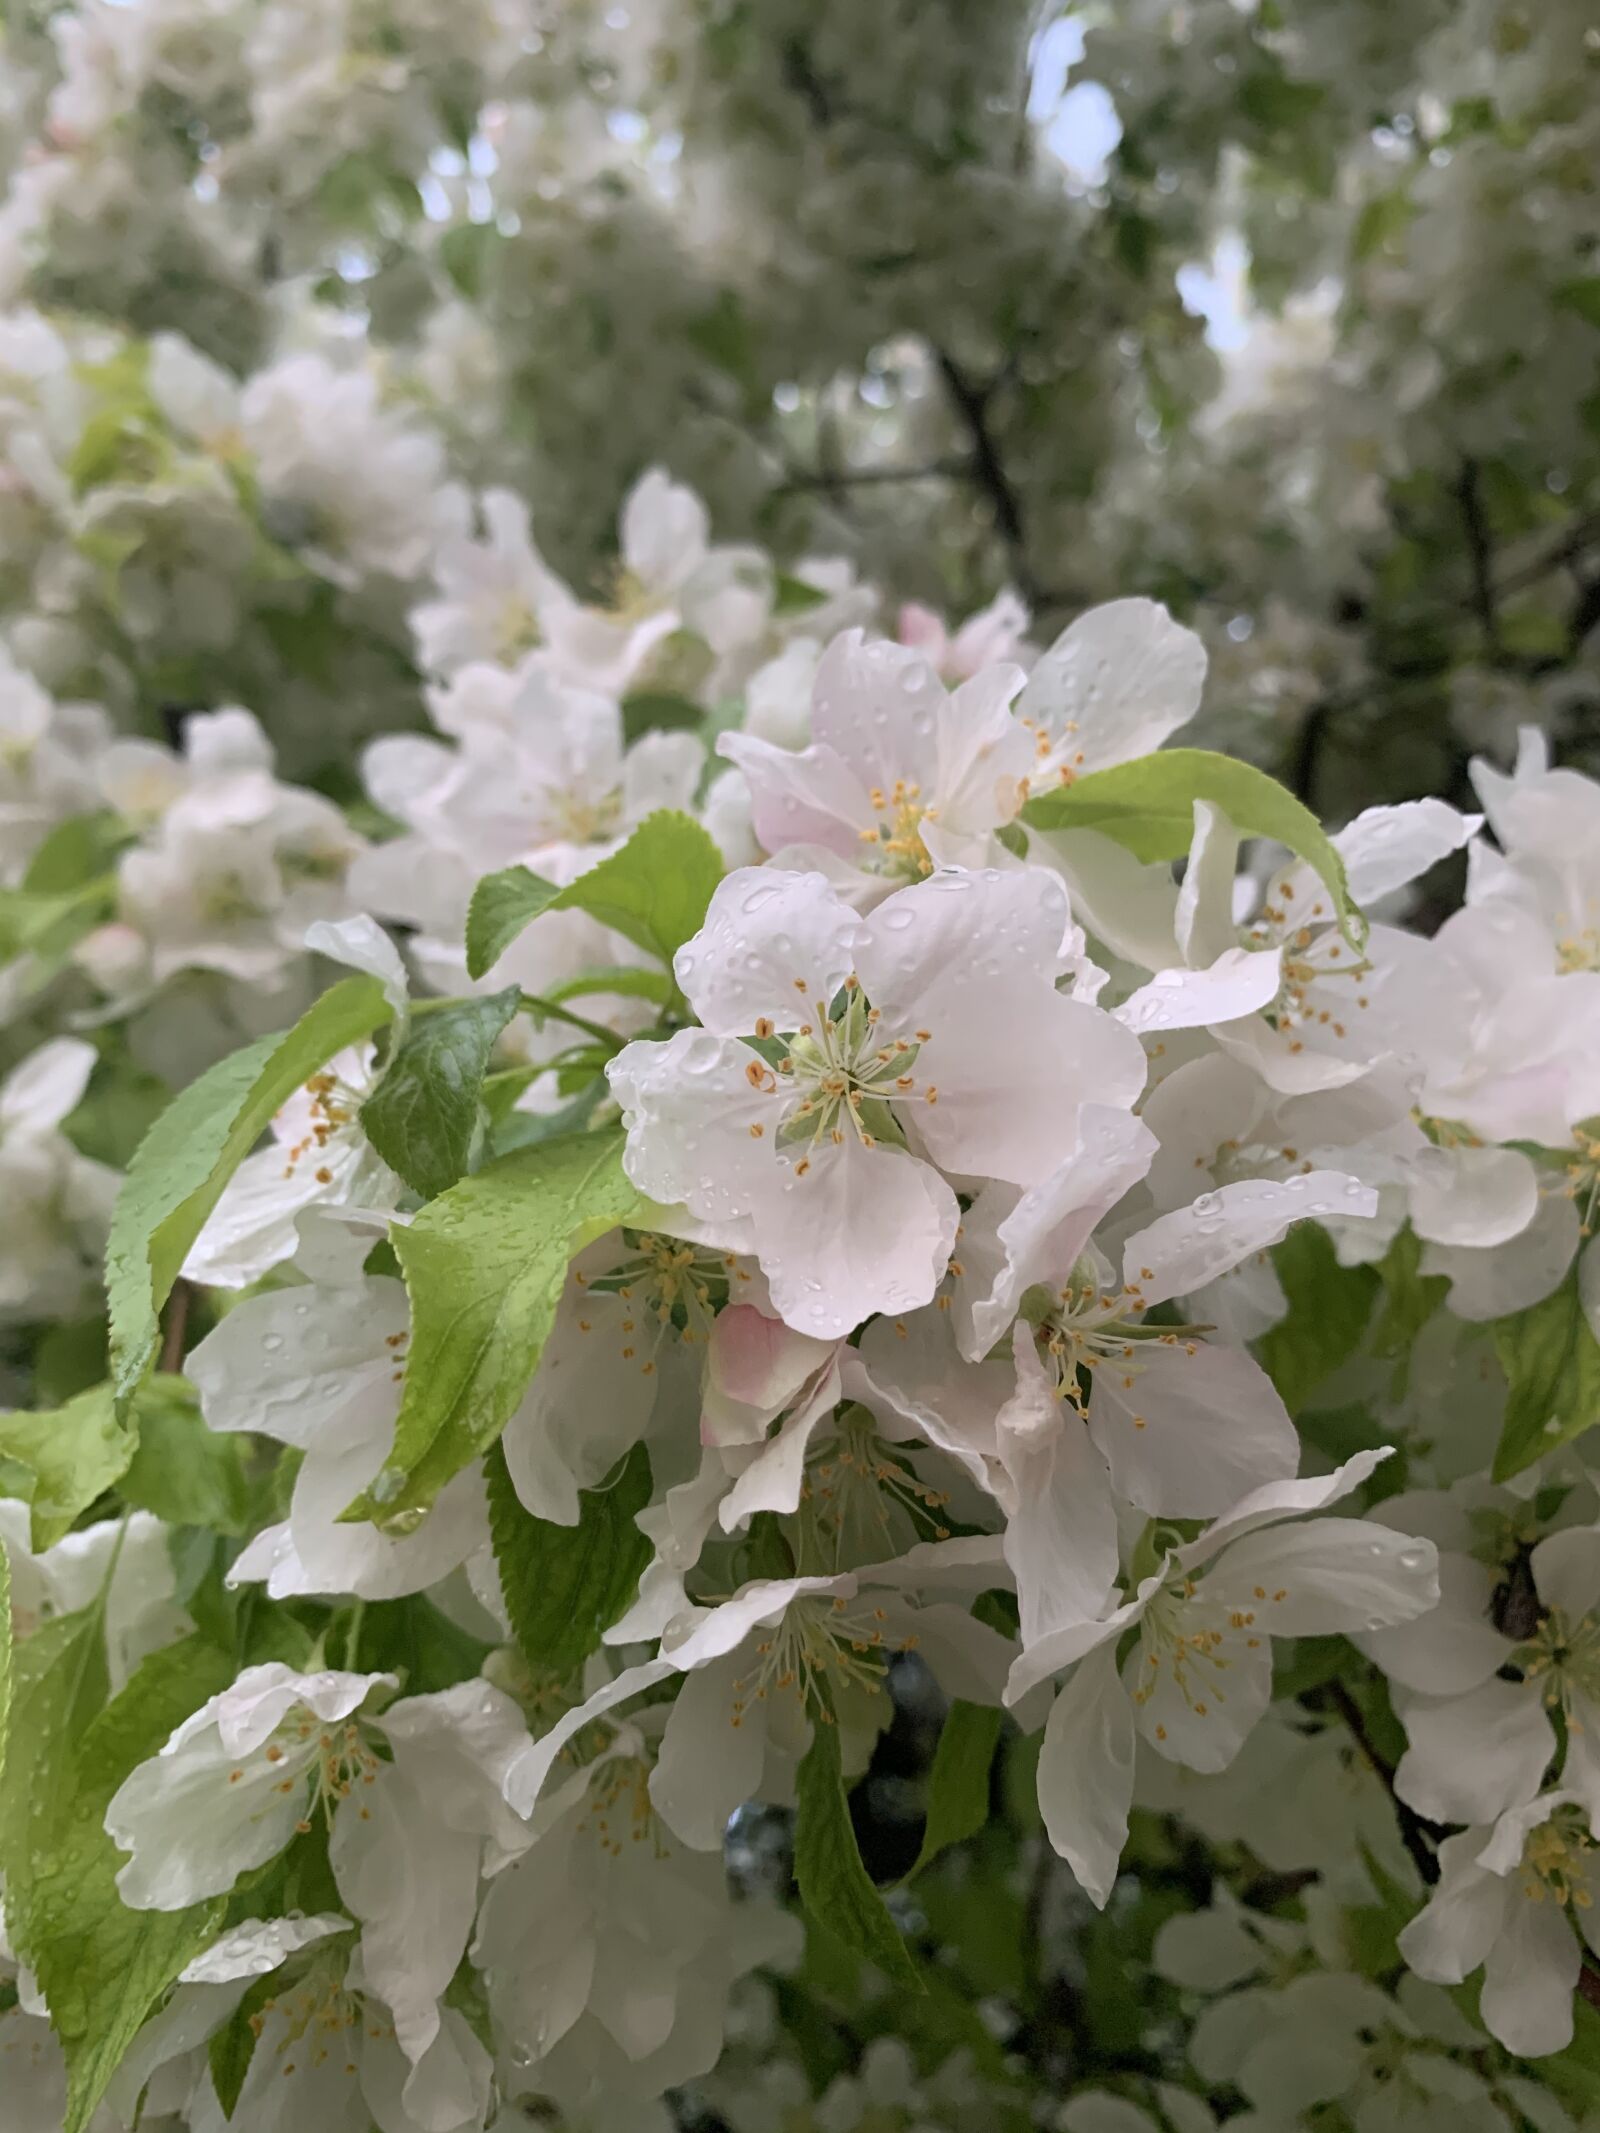 Apple iPhone XS Max + iPhone XS Max back dual camera 4.25mm f/1.8 sample photo. Cherry, blossom, white photography